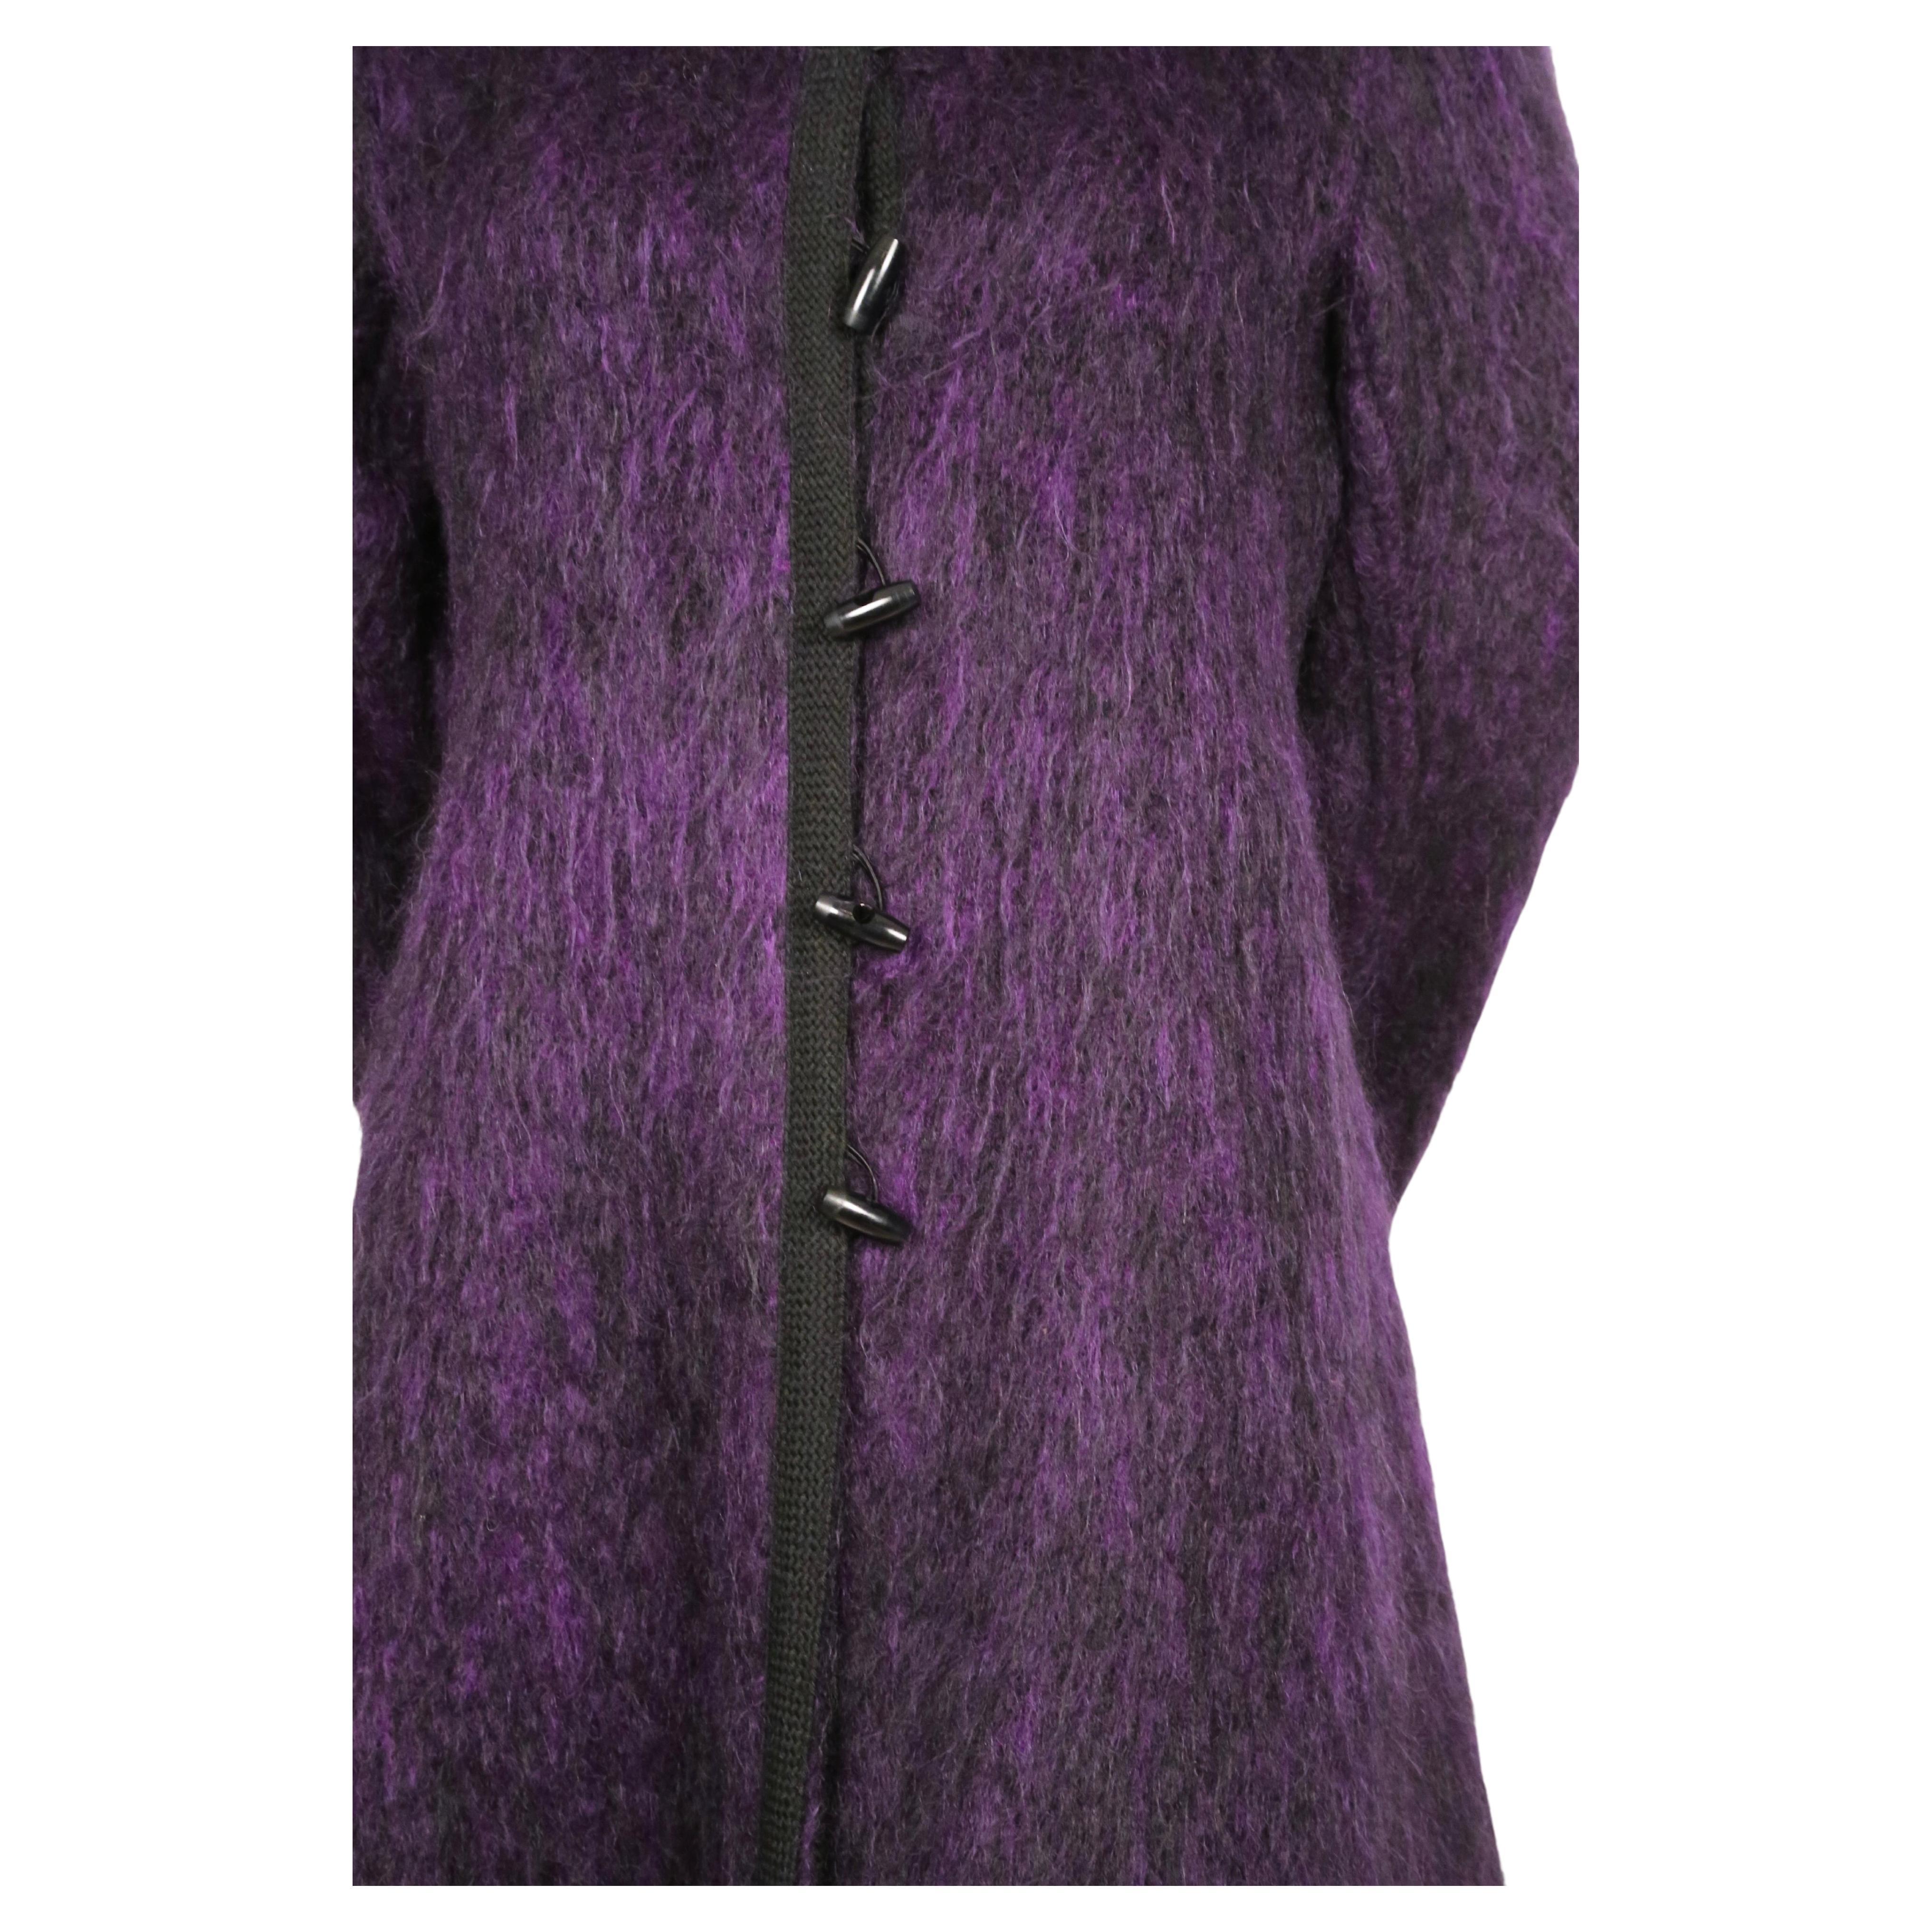 1960's YVES SAINT LAURENT violet purple brushed wool coat with braided trim For Sale 1